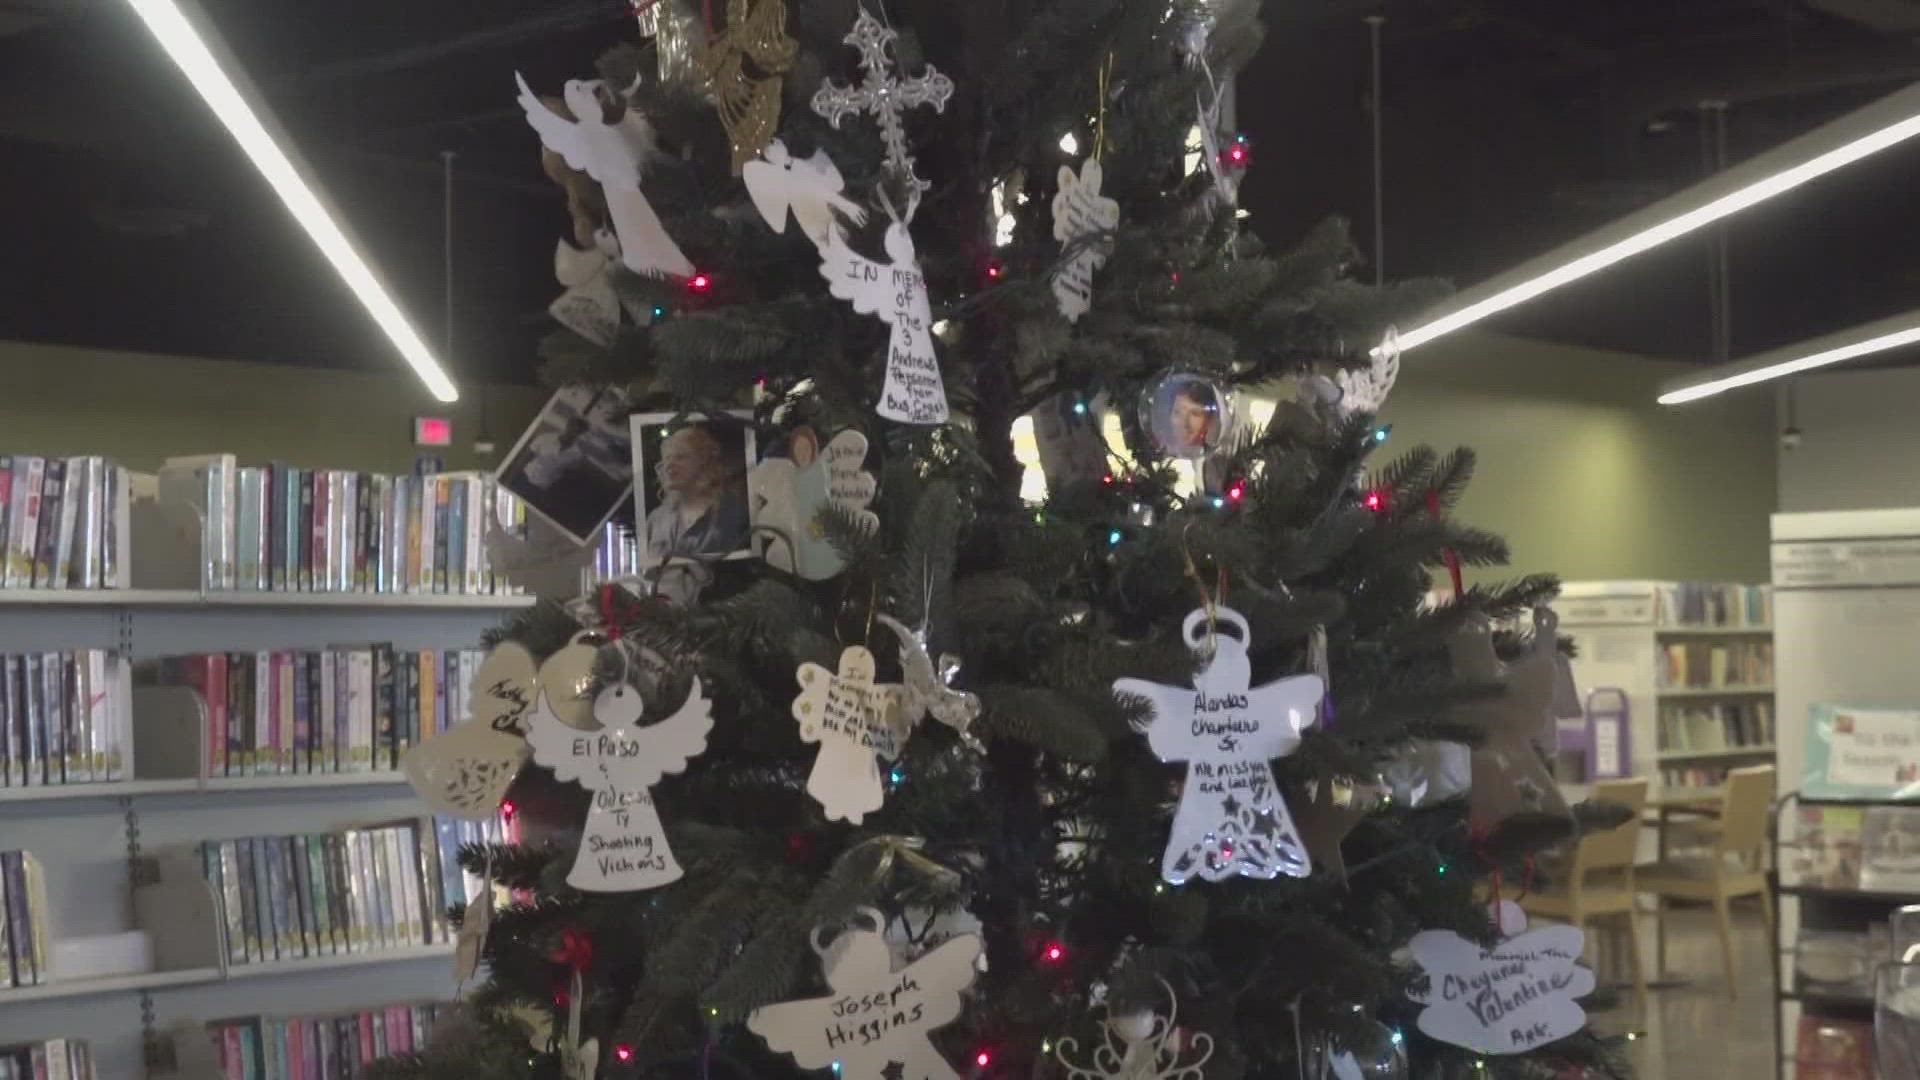 Midland Victim's Coalition has set up a memorial angel tree at the Midland County Centennial Library.